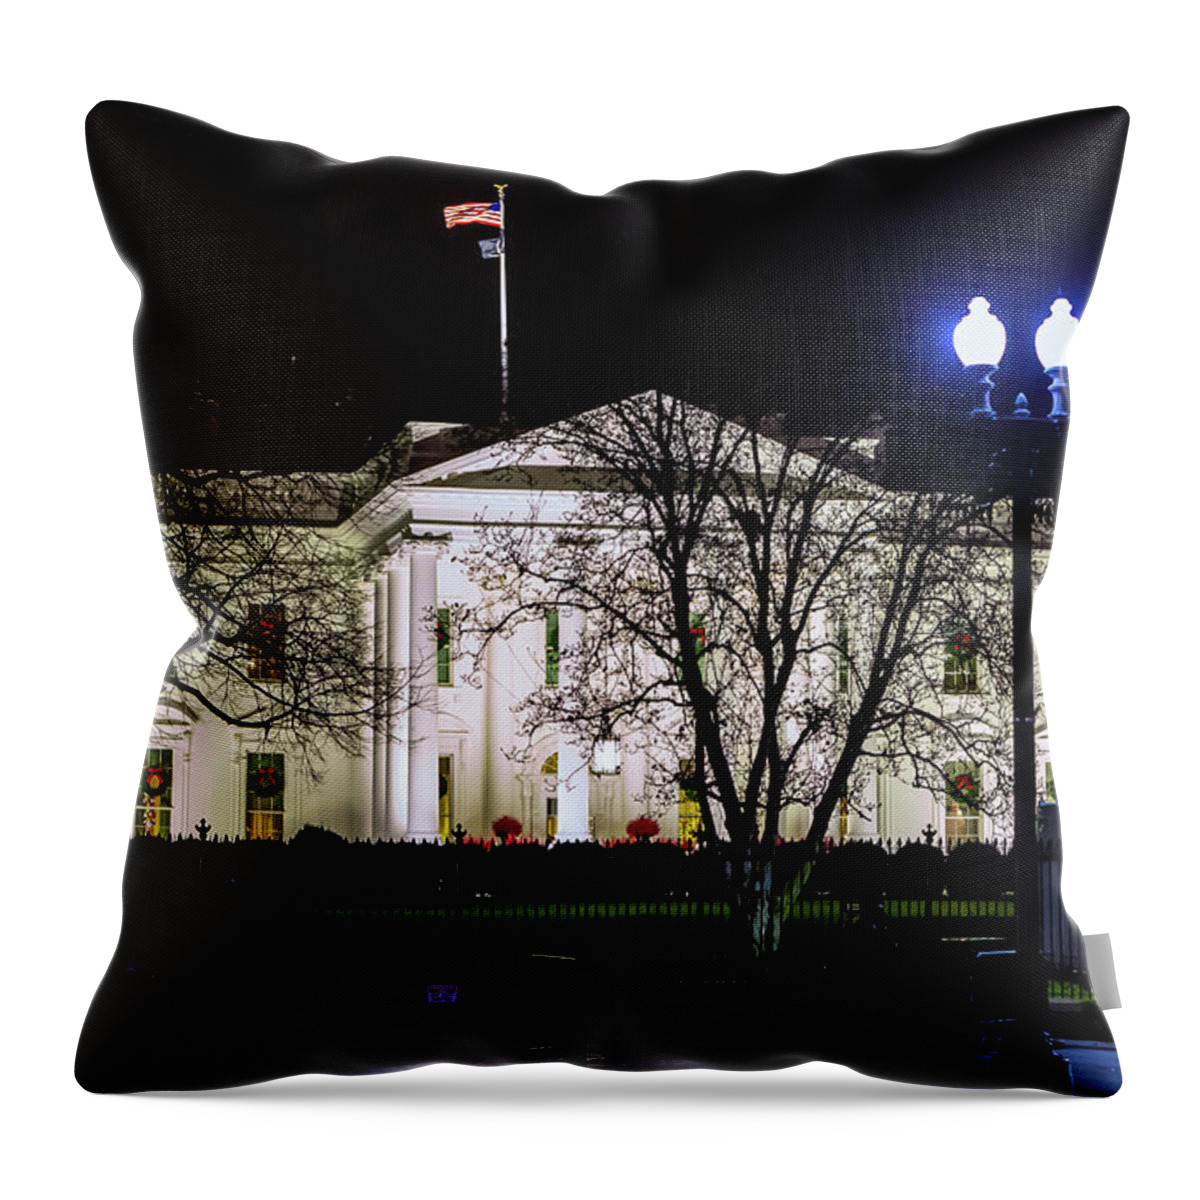 The White House Throw Pillow featuring the digital art The White House by SnapHappy Photos